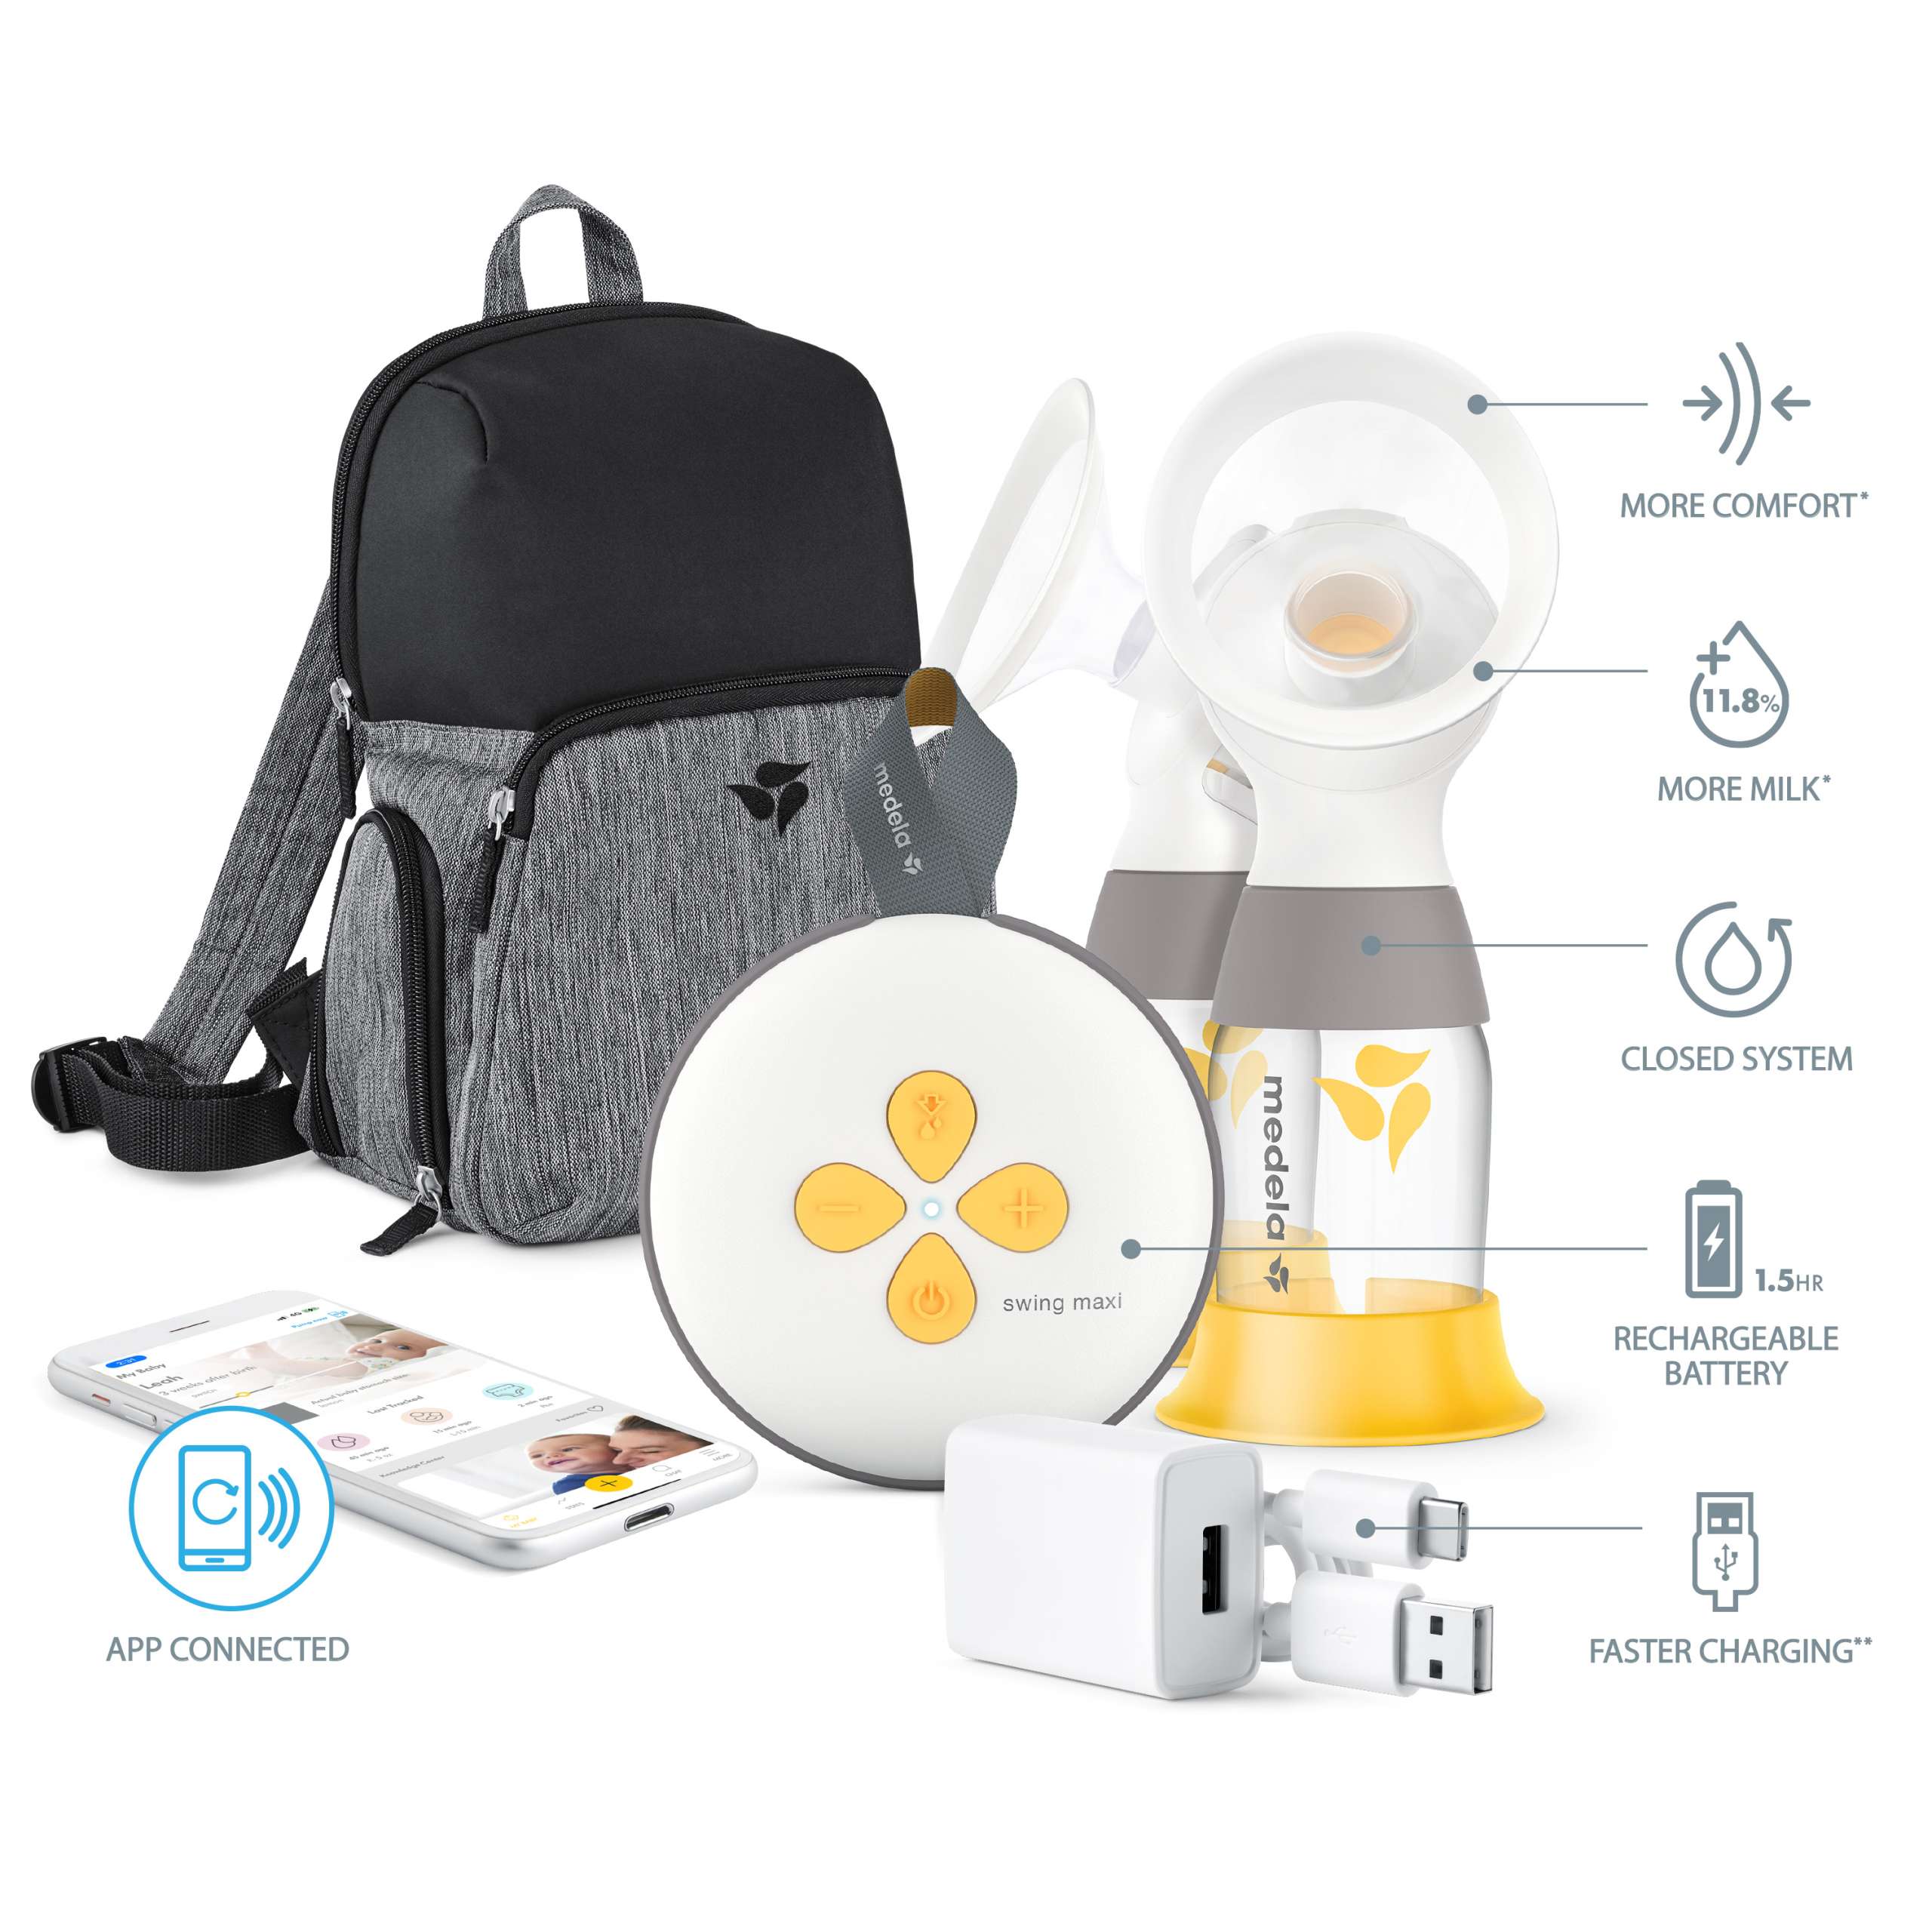 Quick overview: Medela Swing electric breast pump 